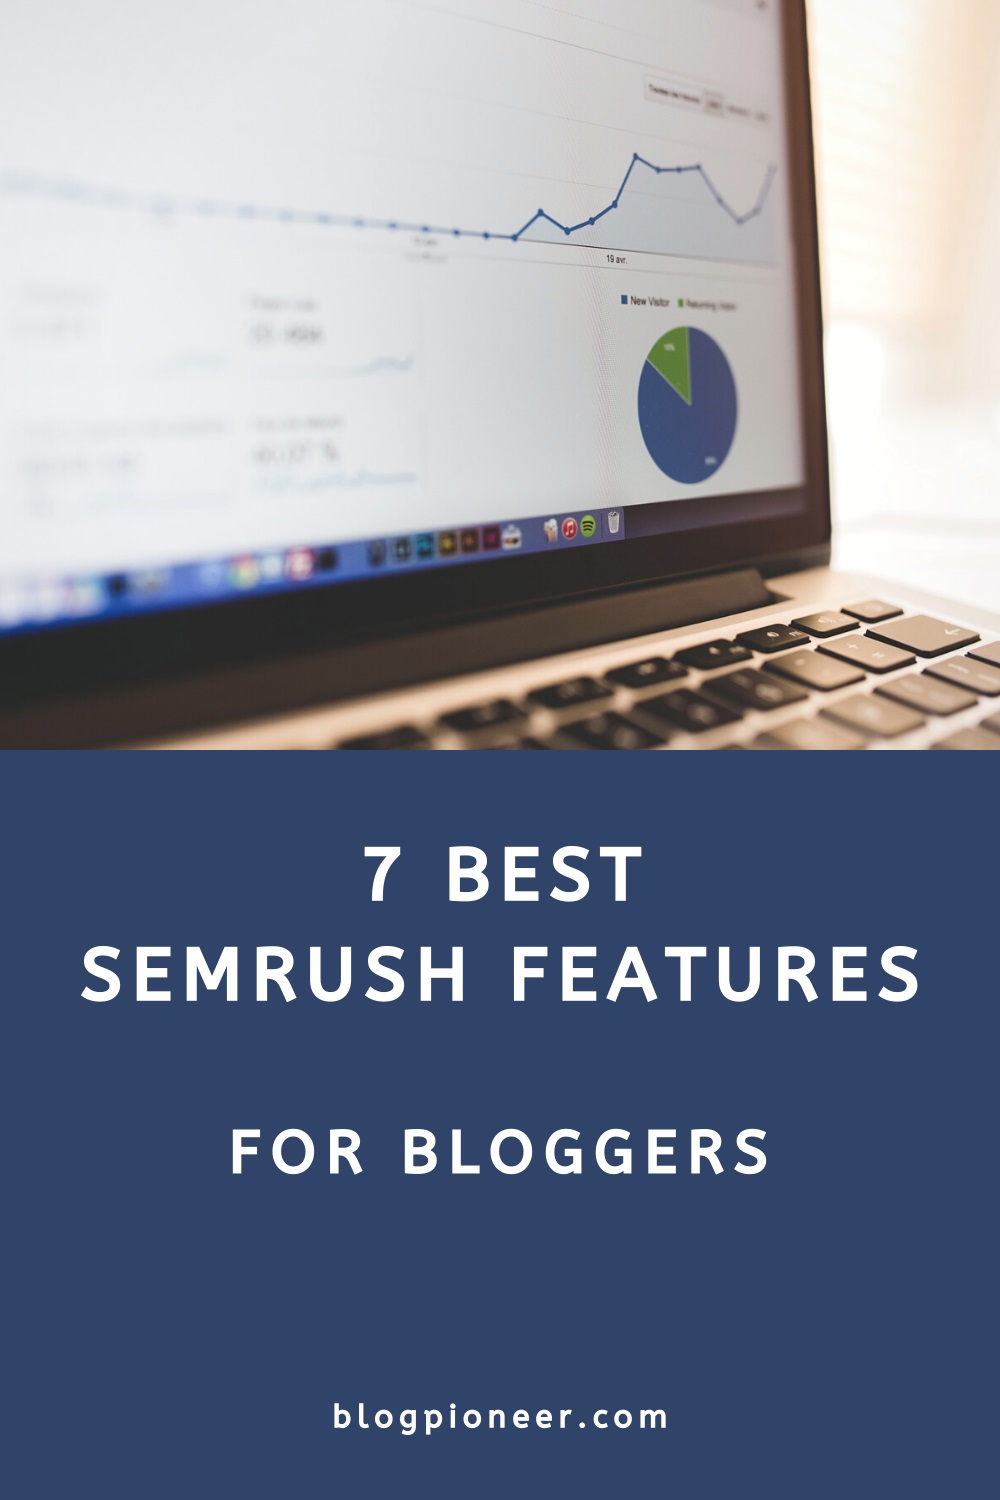 7 Best Semrush features for bloggers